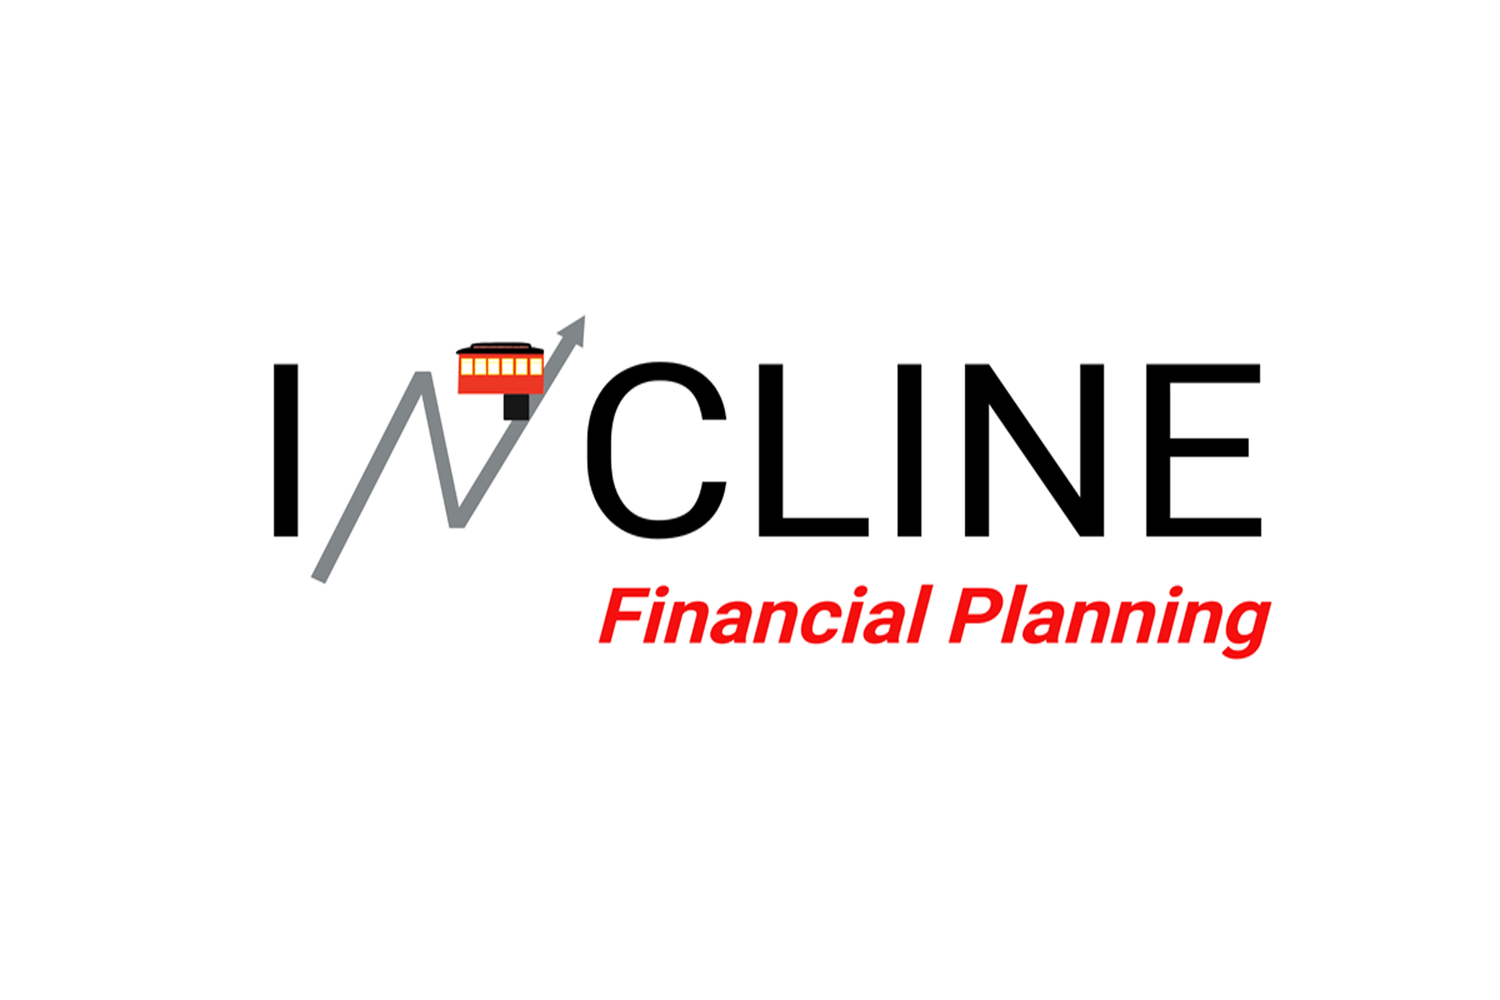 Incline Financial Planning